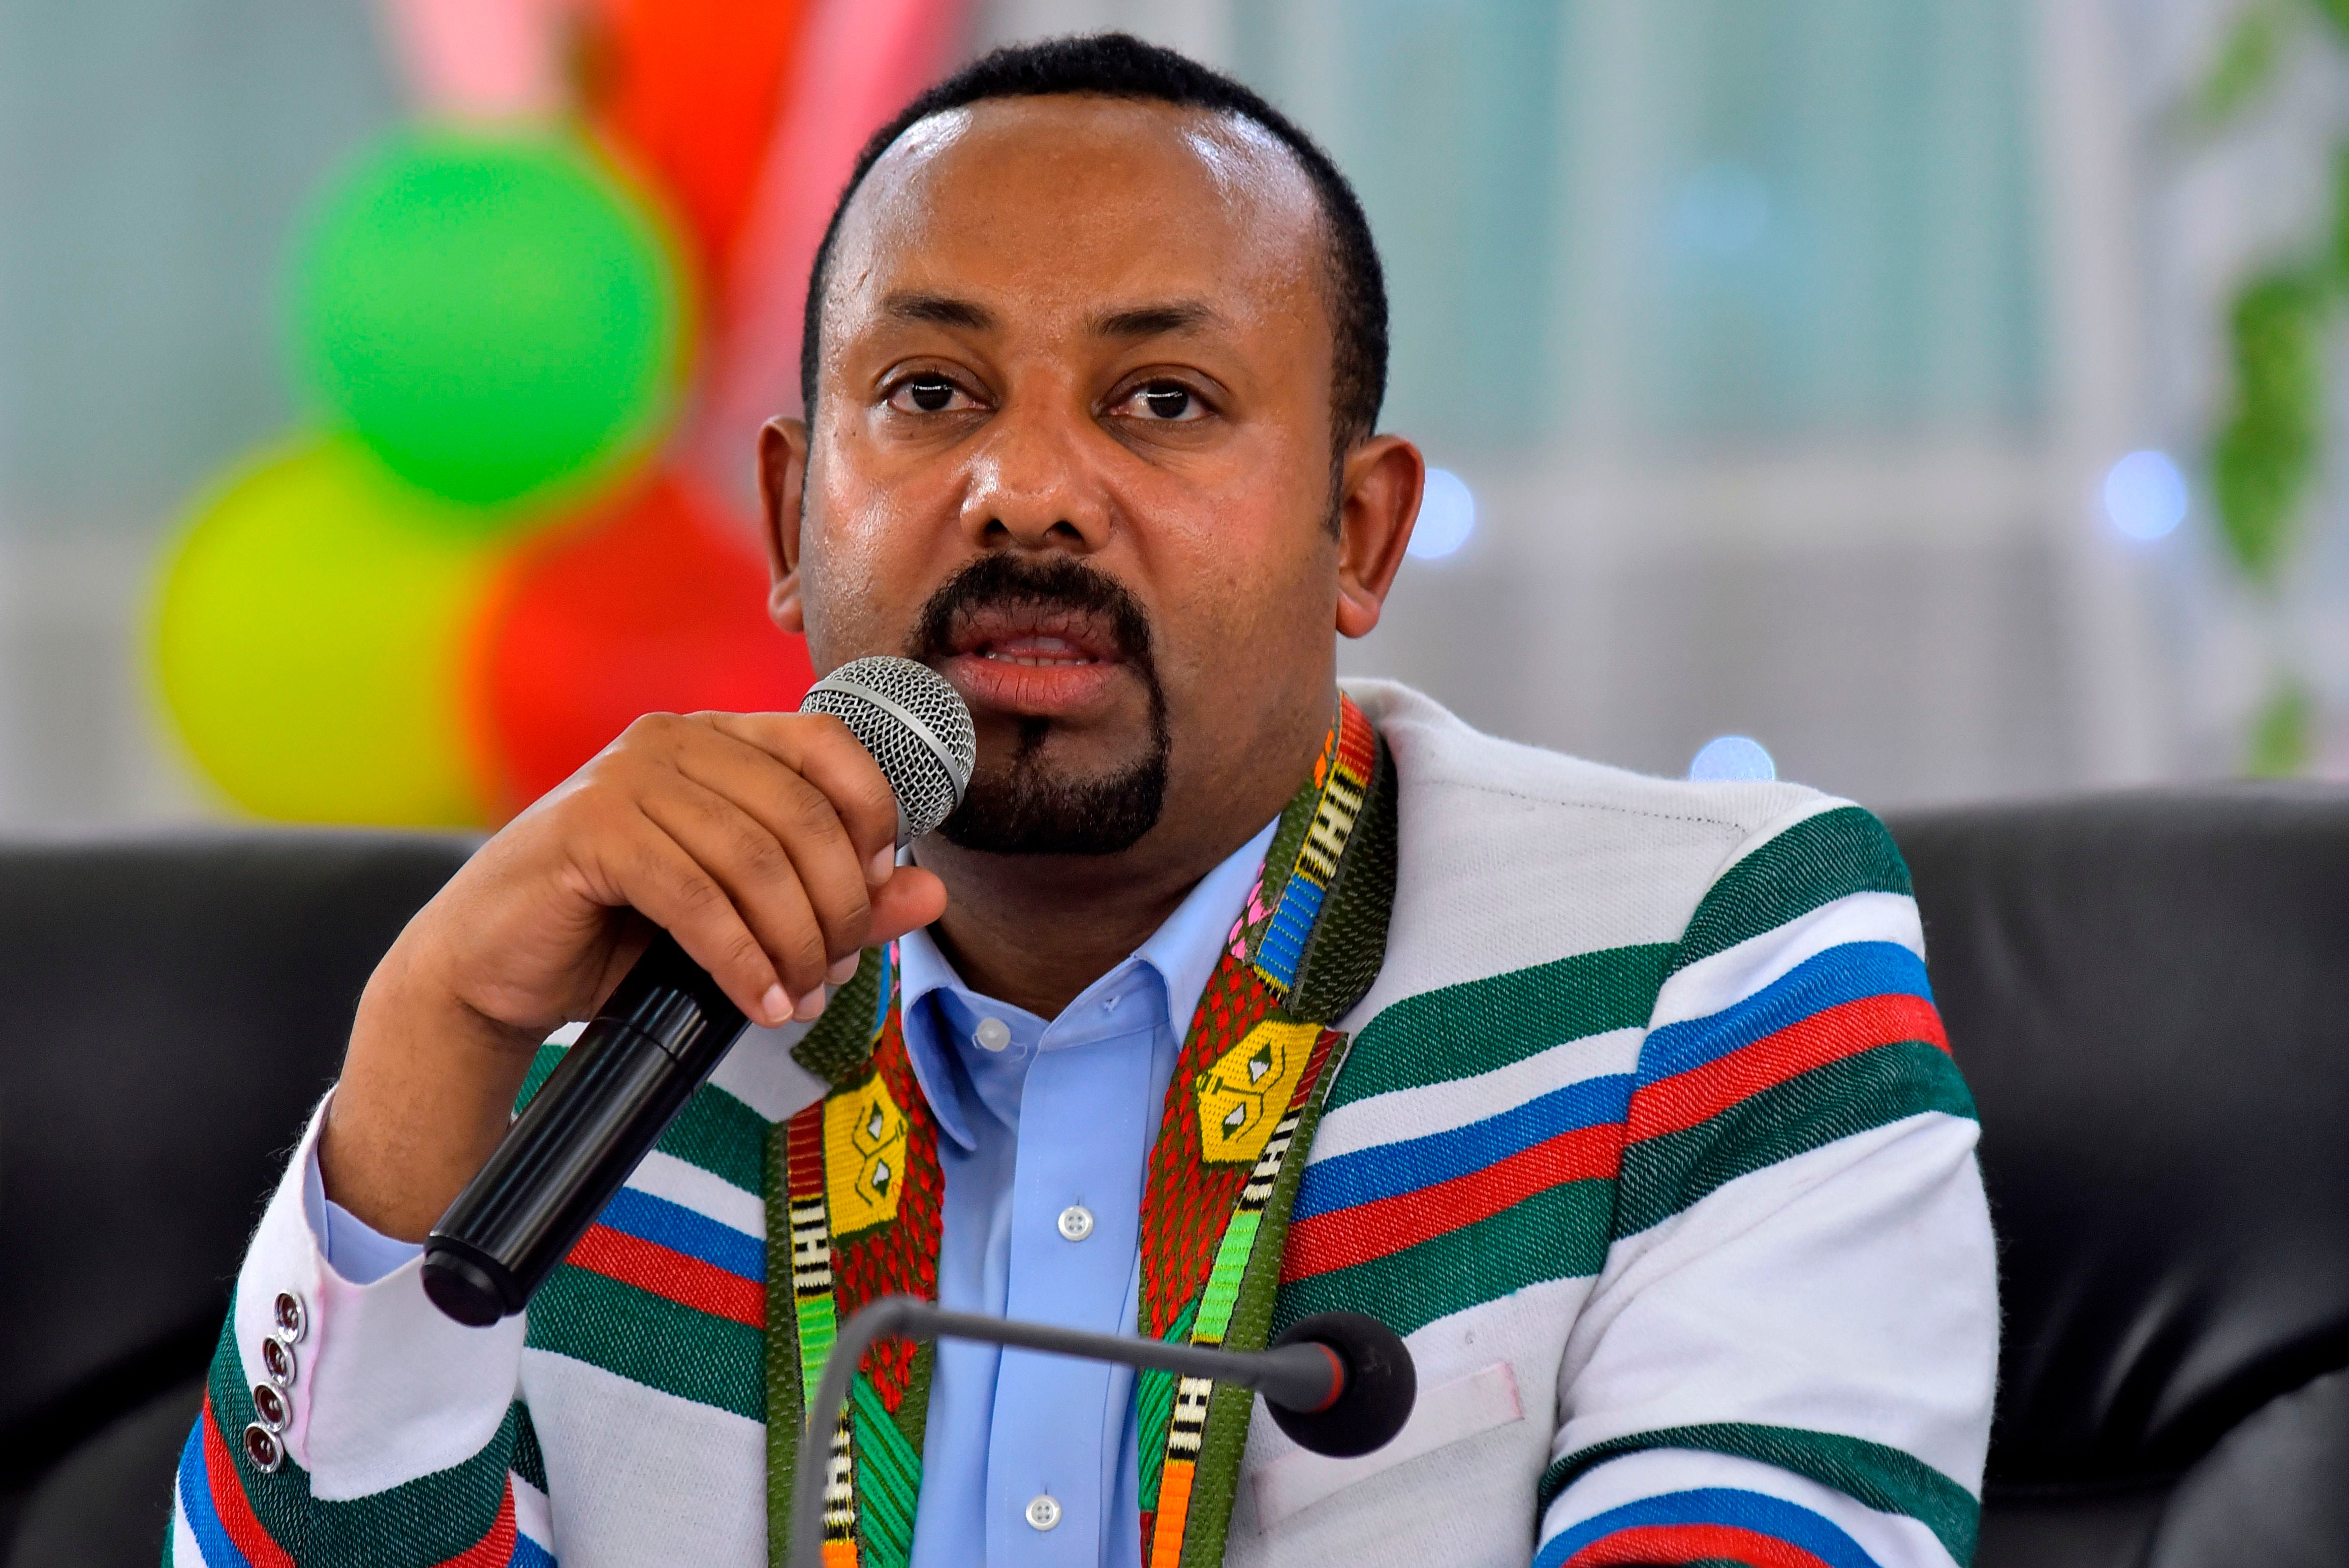 <p>Abiy Ahmed won the 2019 Nobel Peace Prize which noted work on ‘discontinuing media censorship’</p>